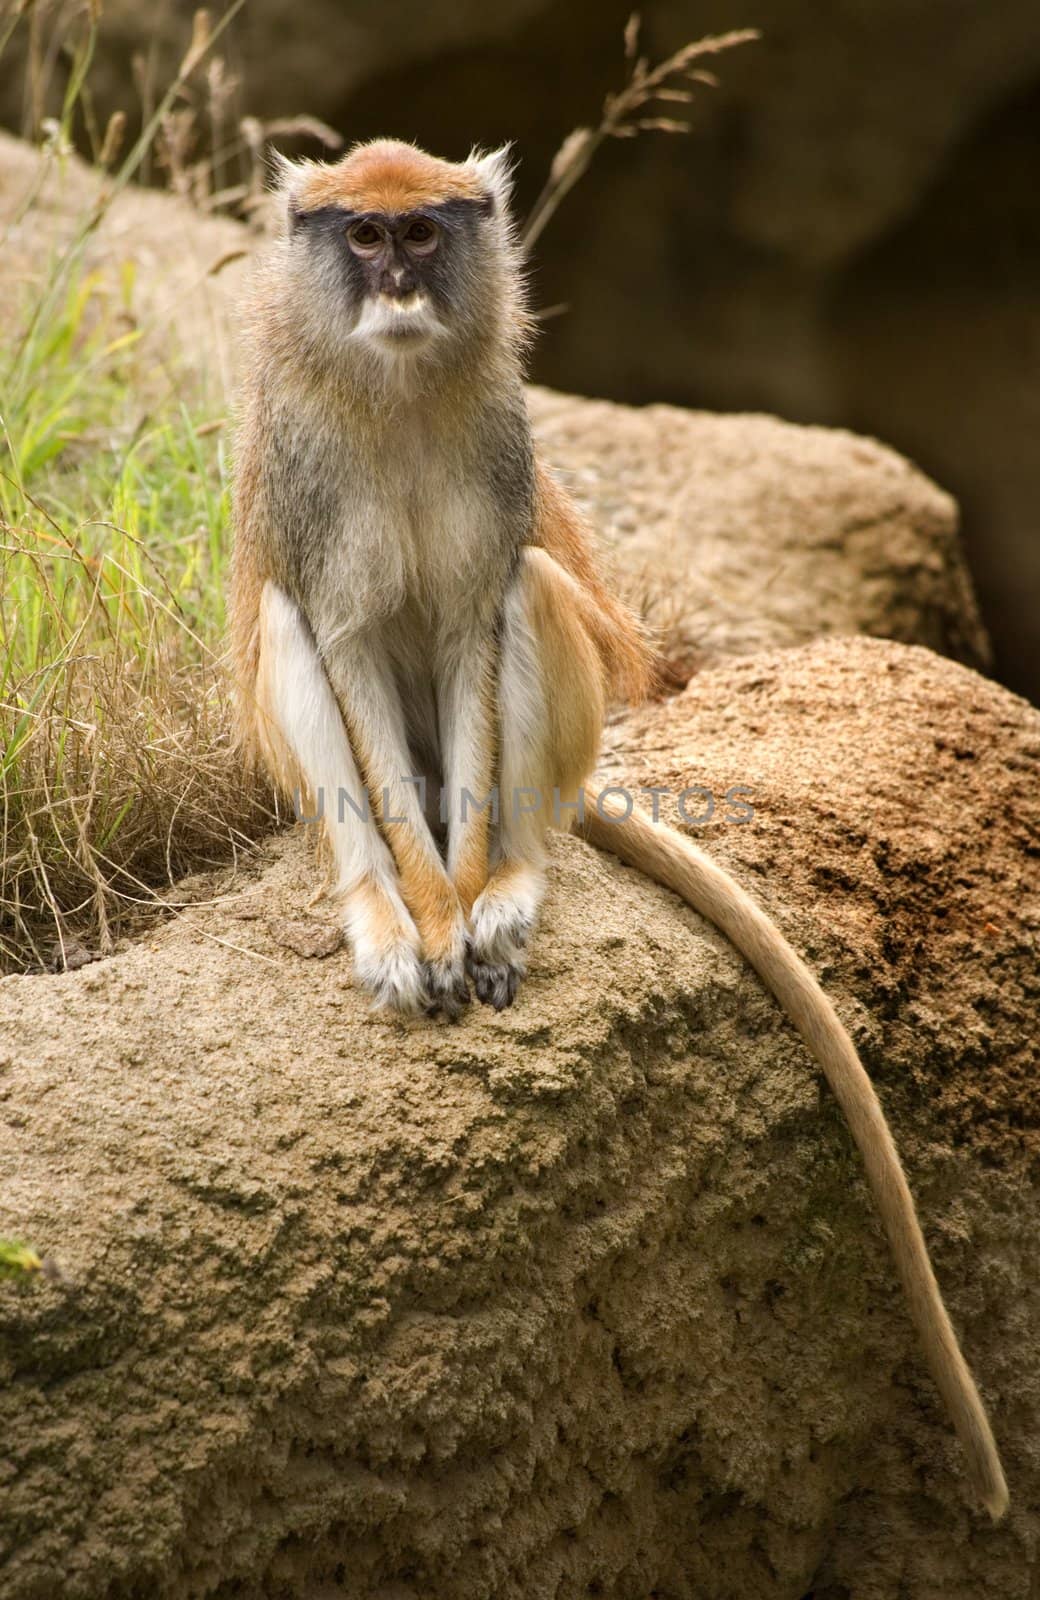 Patas Monkey Looking At You by bill_perry